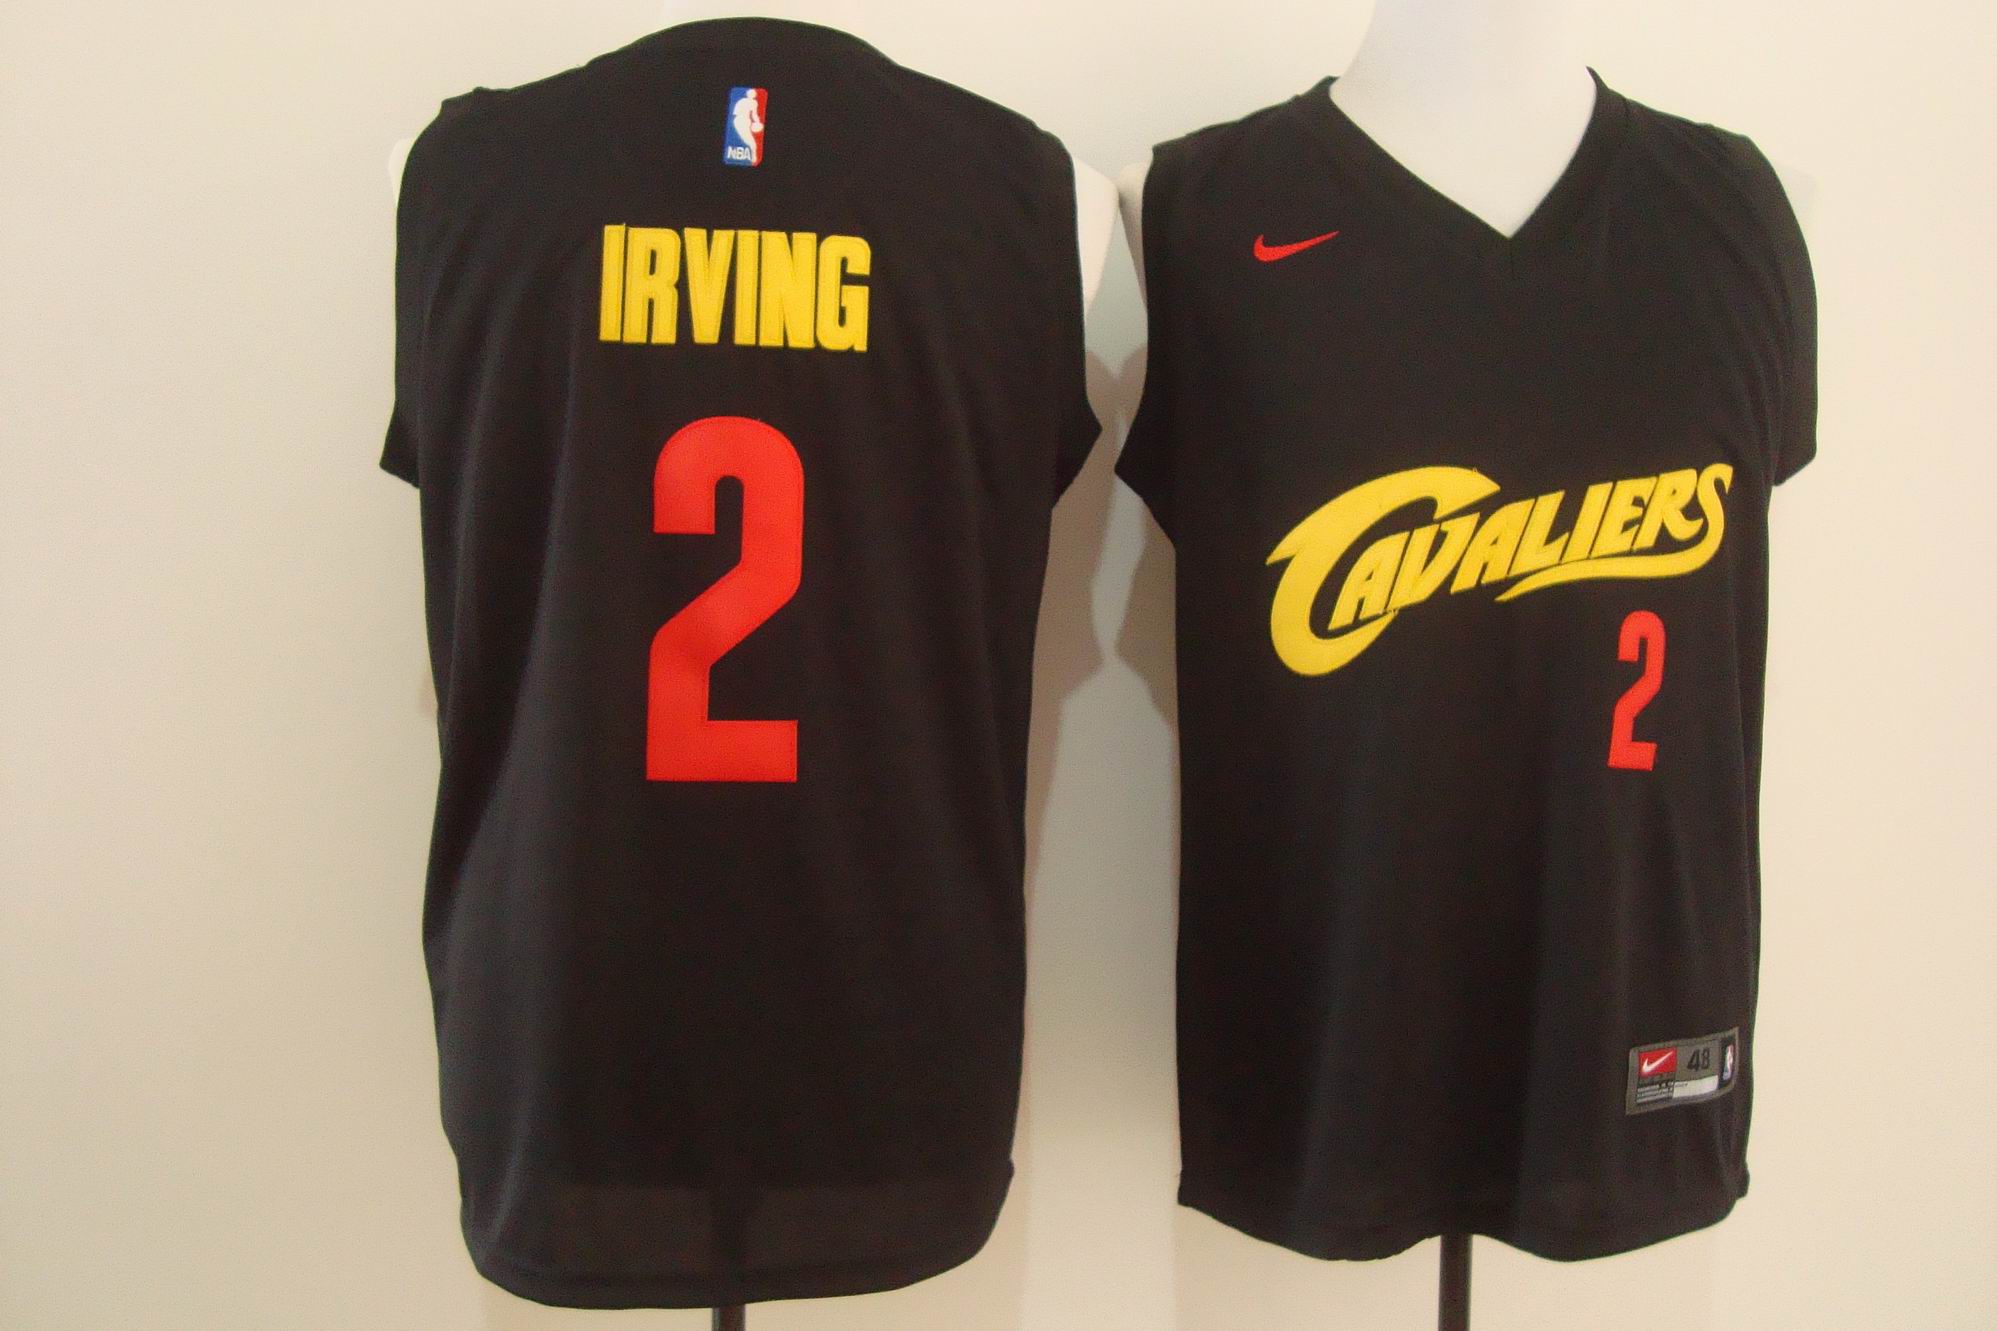 Men's Nike Cleveland Cavaliers #2 Kyrie Irving Black and Red Stitched NBA Jersey